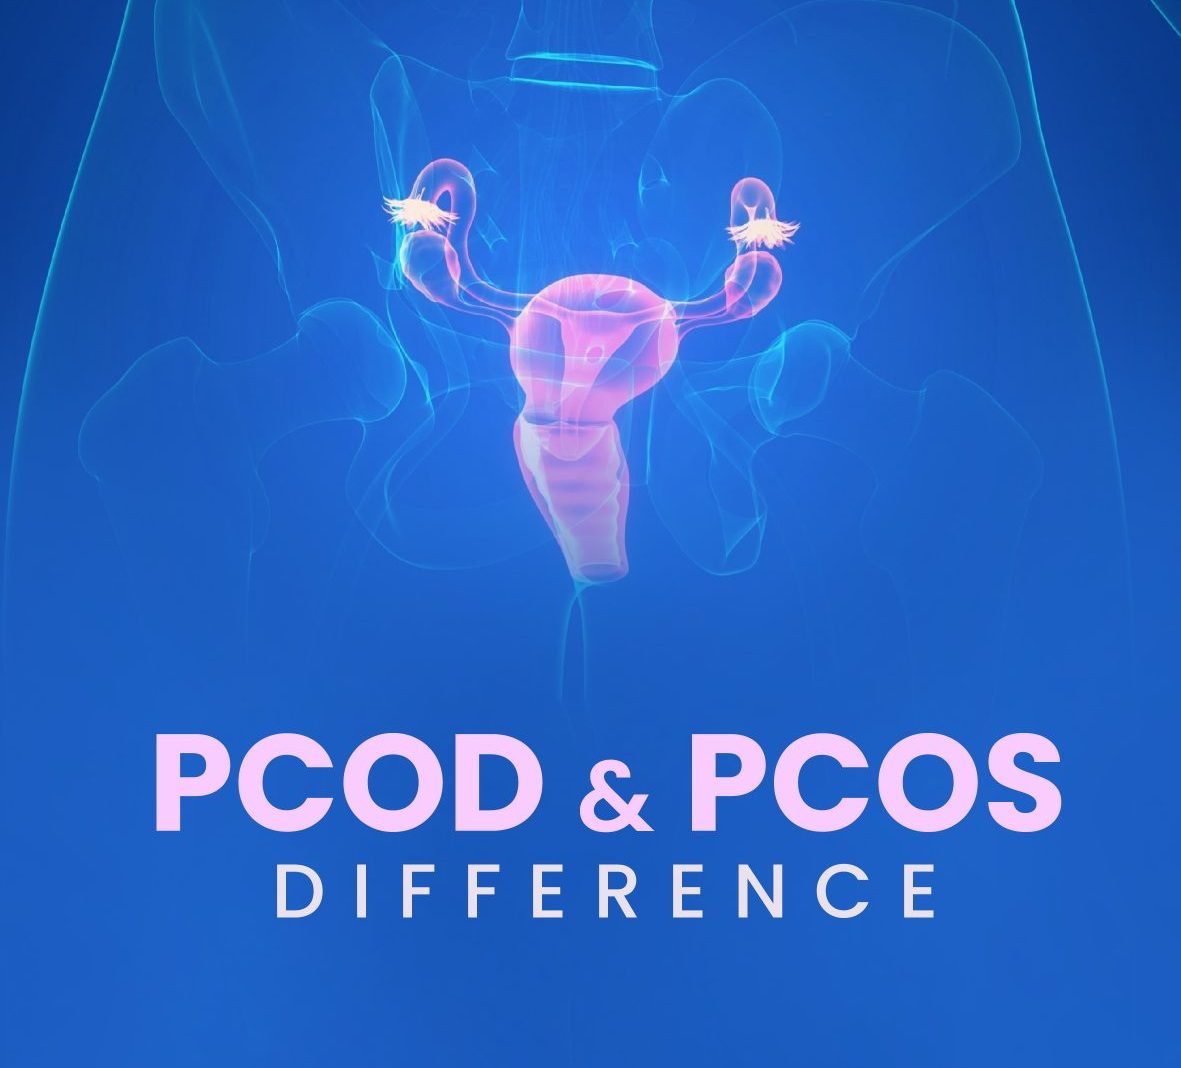 "PCOD", "PCOS"